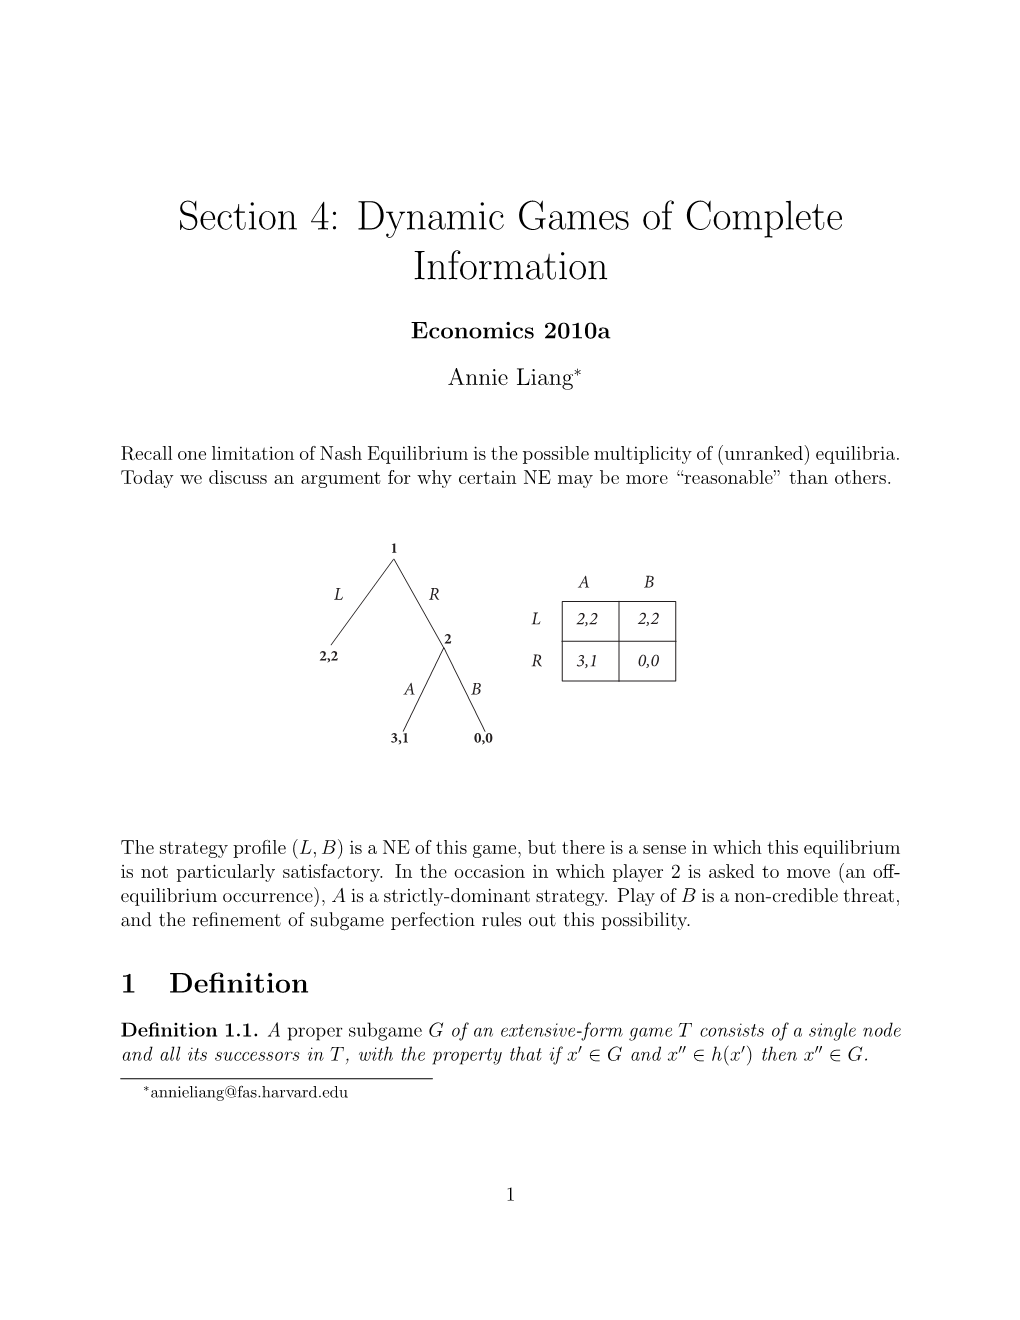 Dynamic Games of Complete Information.Pdf